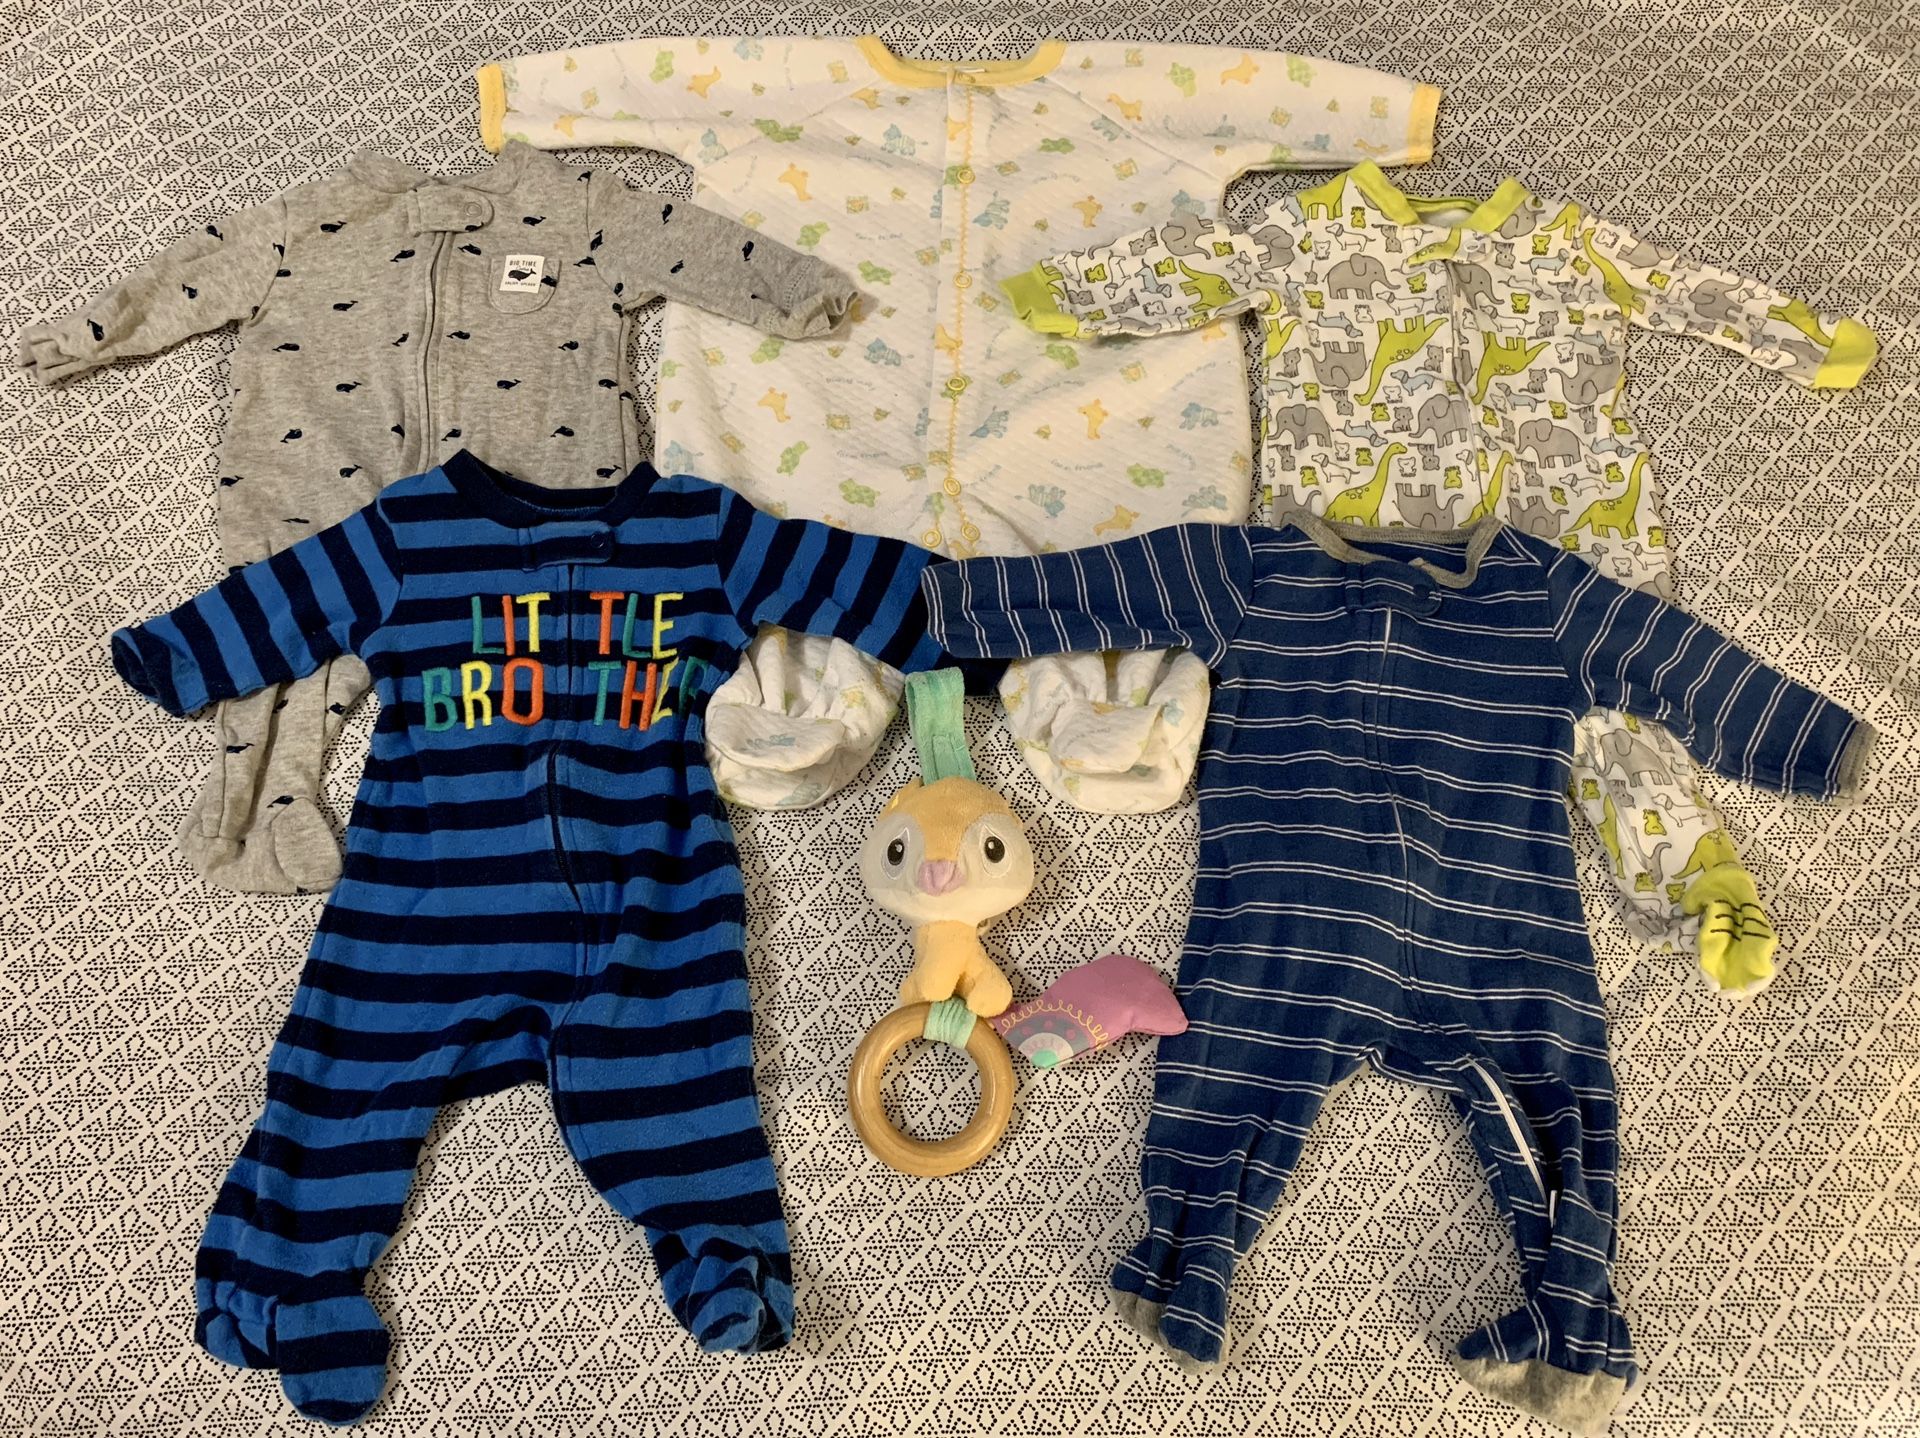 Baby boy (0-3 months) clothes & Toy!